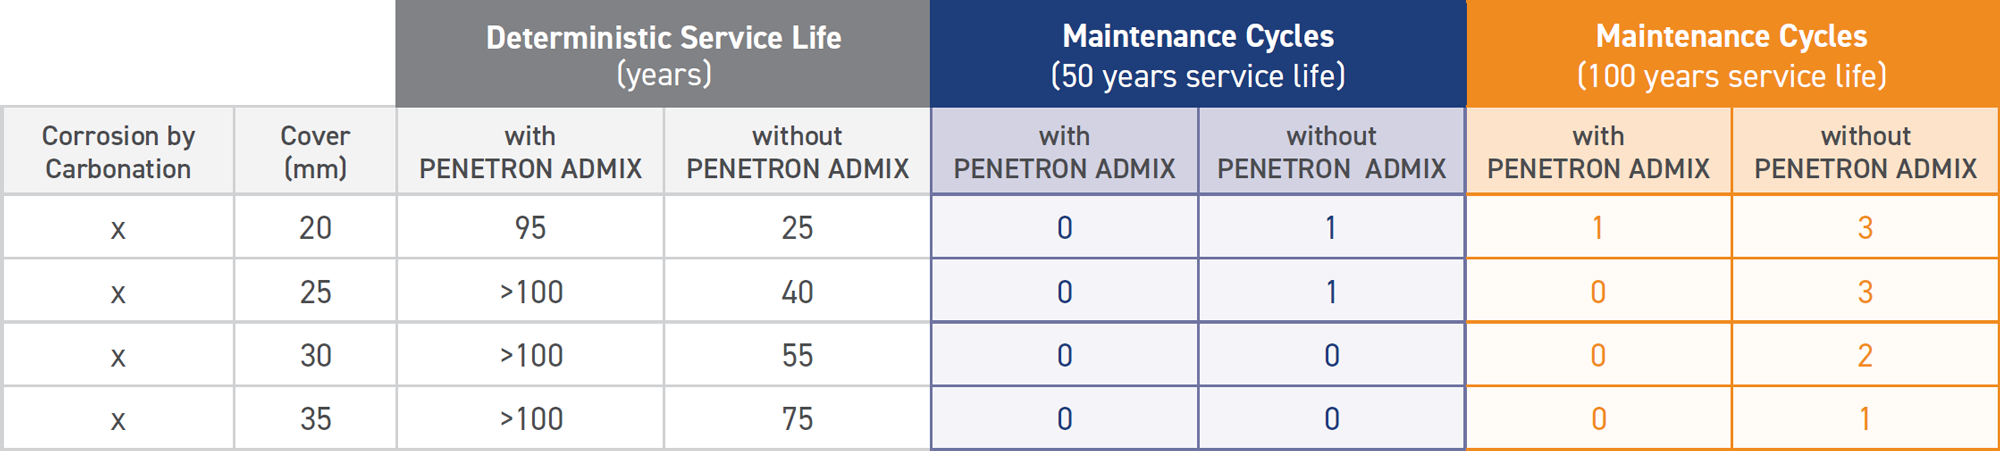 Deterministic Service Life (years)